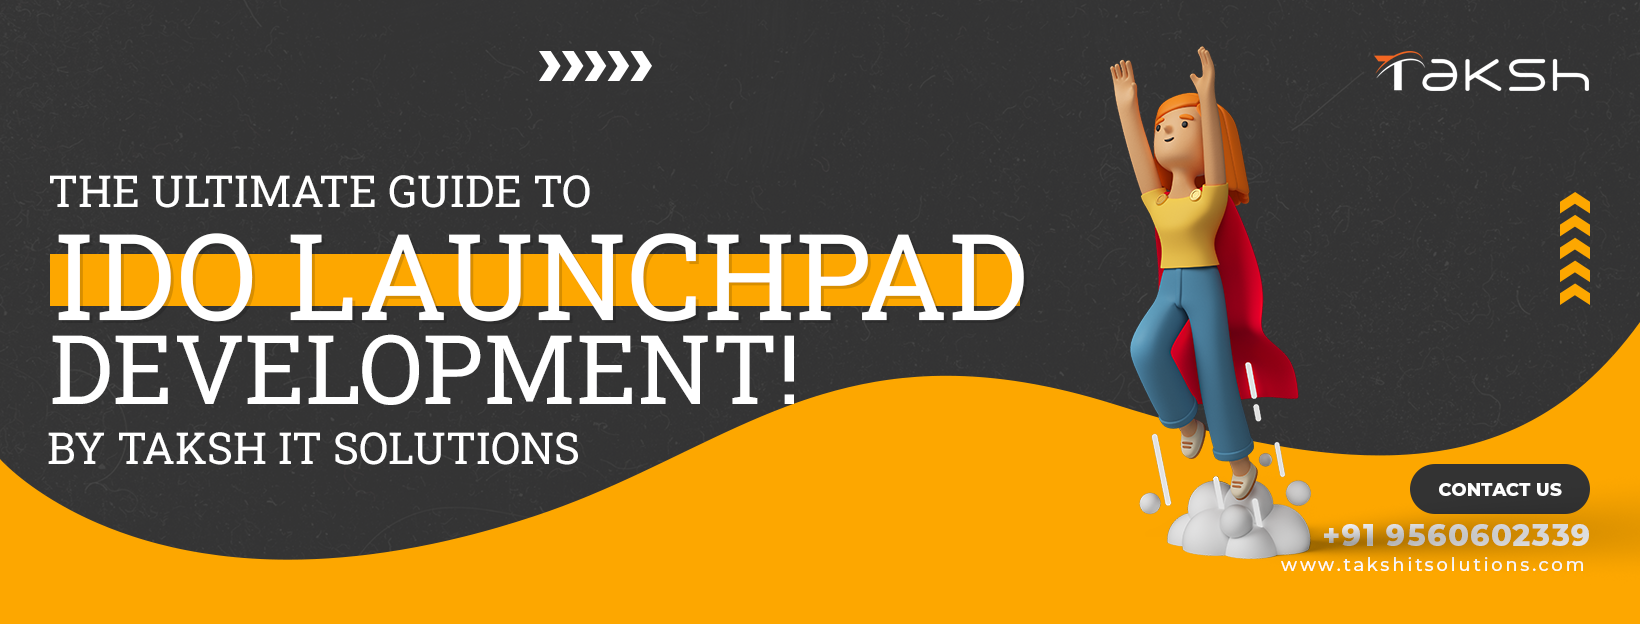 The Ultimate Guide to IDO Launchpad Development by Taksh IT Solutions